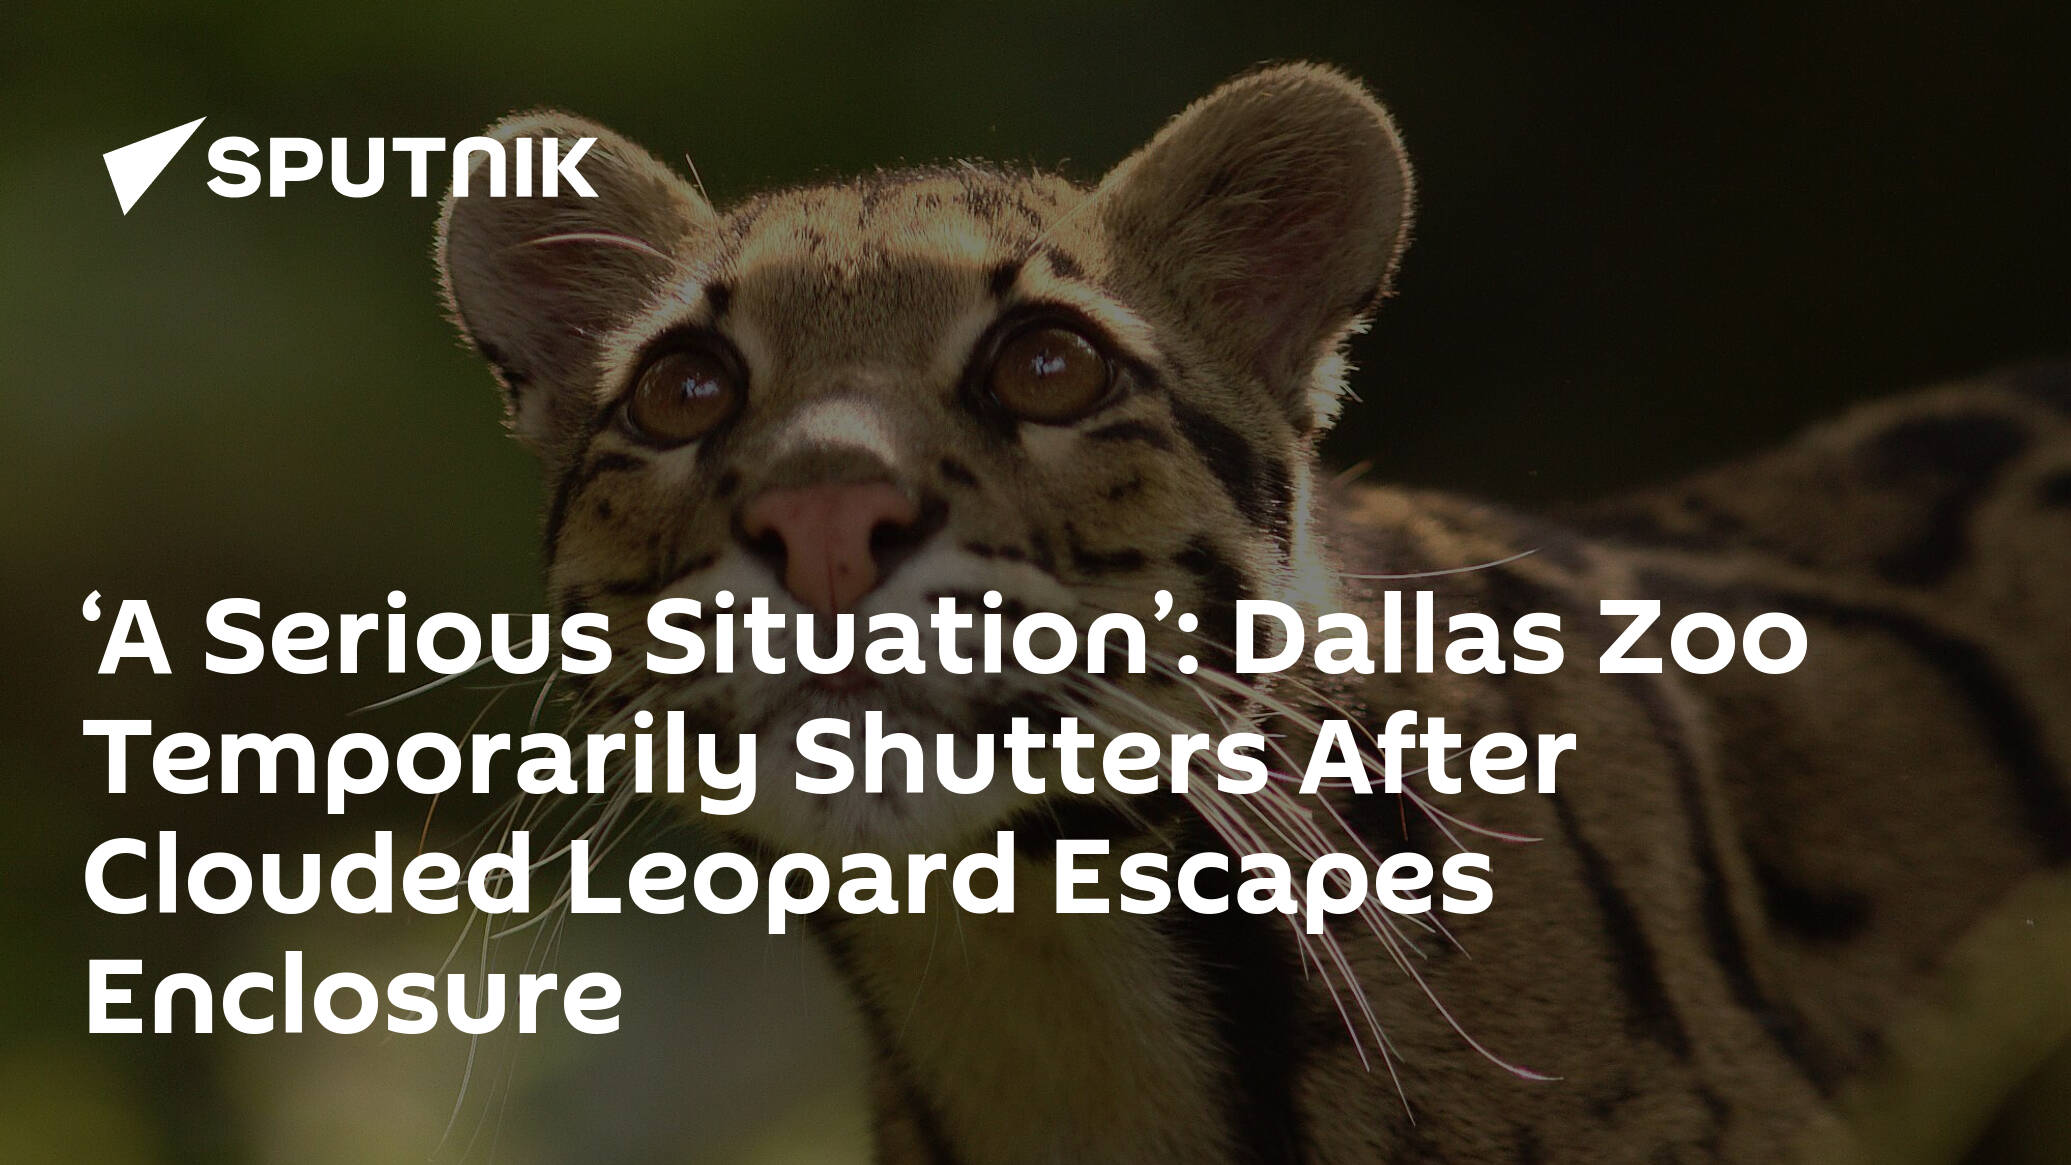 A Serious Situation': Dallas Zoo Temporarily Shutters After Clouded Leopard  Escapes Enclosure - 13.01.2023, Sputnik International